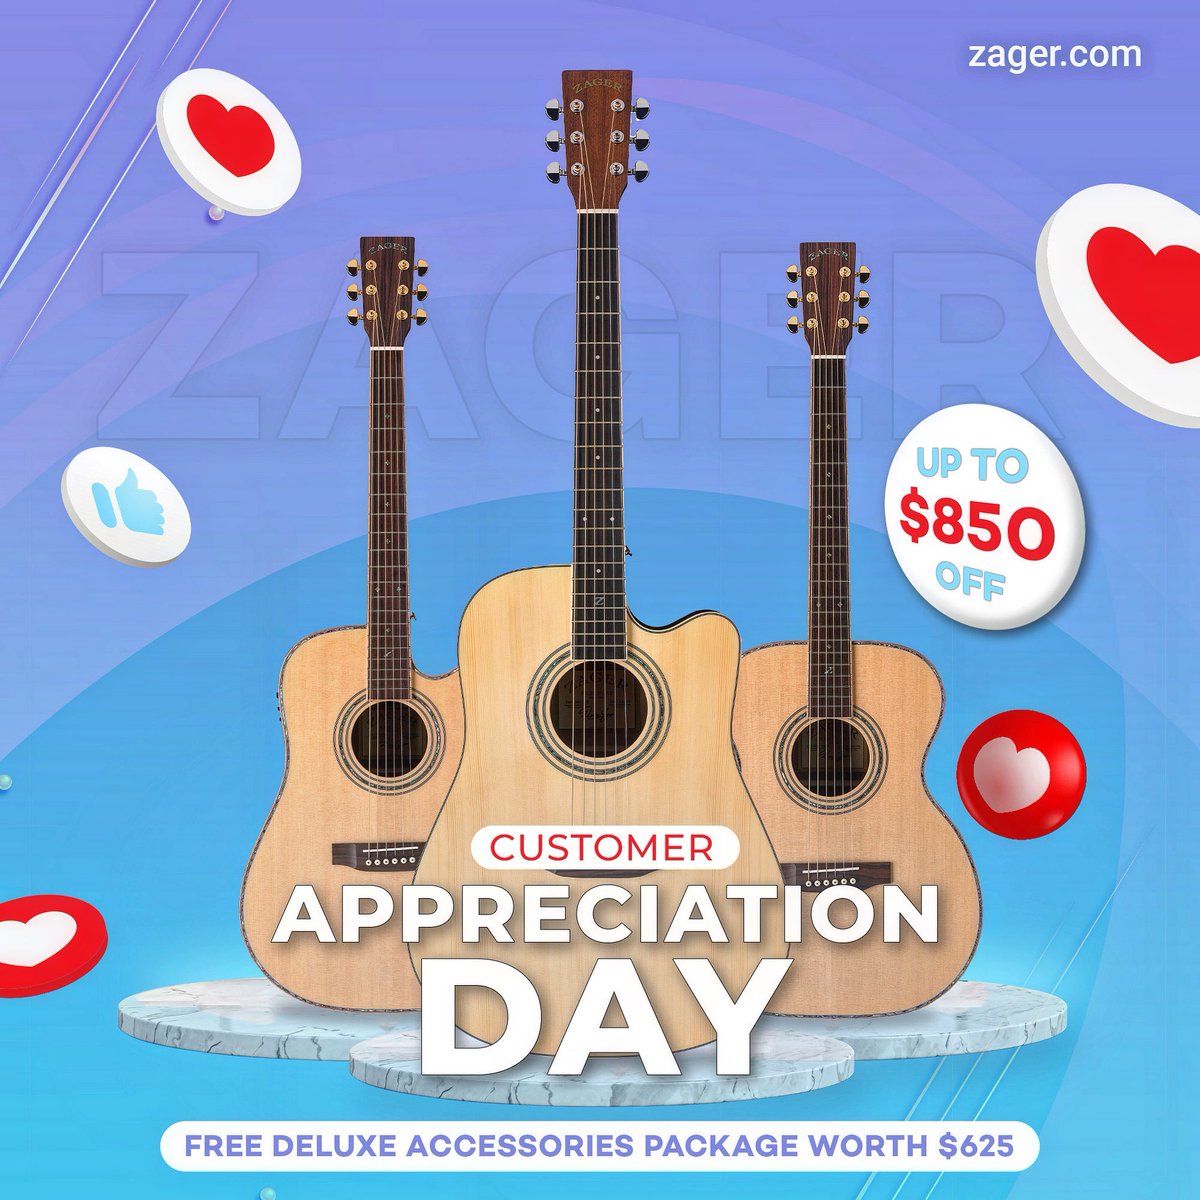 We are celebrating our loyal customers with our #Zager #CustomerAppreciationDay Sale going on now! ❤️ Shop sale at: zagerguitar.com/customer-appre… 👍 Get a FREE Accessories Pack with every purchase! #guitar #guitars #acousticguitar #acousicguitars #guitarsale #customerappreciation